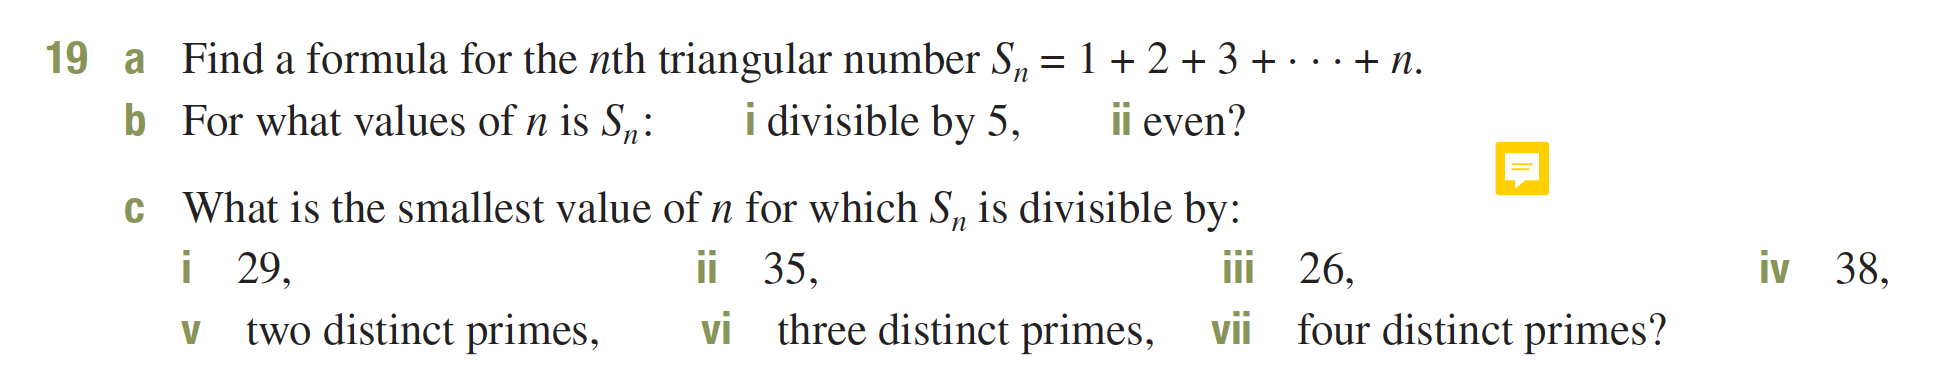 Find a formula for the nth triangular number S2 = 12 3+
19
n
a
i divisible by 5,
ii even?
b For what values of n is S,:
c What is the smallest value of n for which S, is divisible by:
i 29
two distinct primes,
35
vi three distinct primes,
iv 38,
26,
four distinct primes?
vii
V
